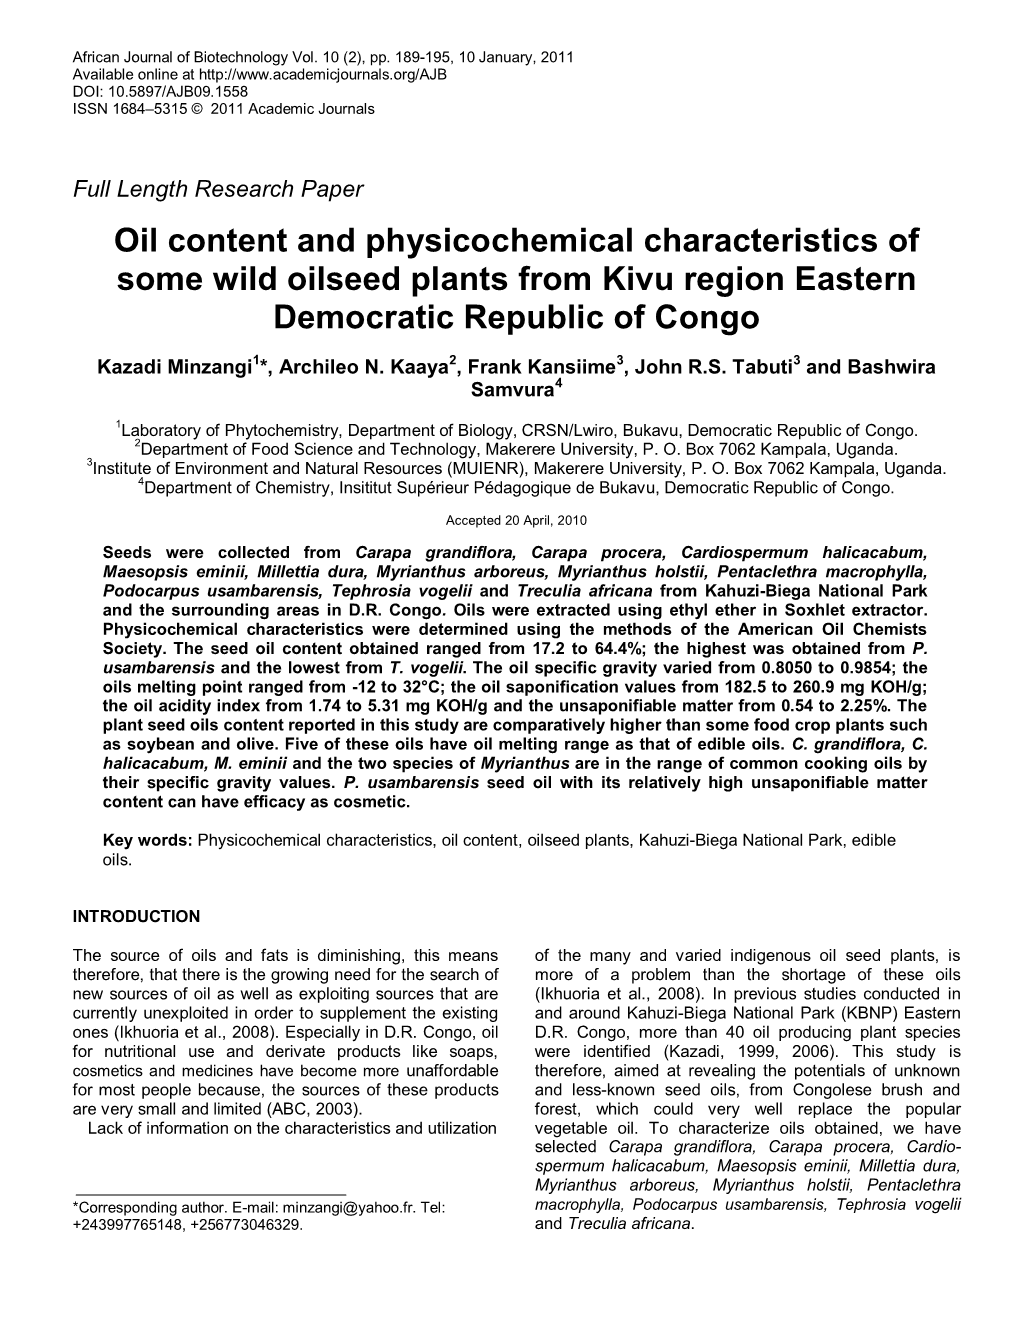 Oil Content and Physicochemical Characteristics of Some Wild Oilseed Plants from Kivu Region Eastern Democratic Republic of Congo